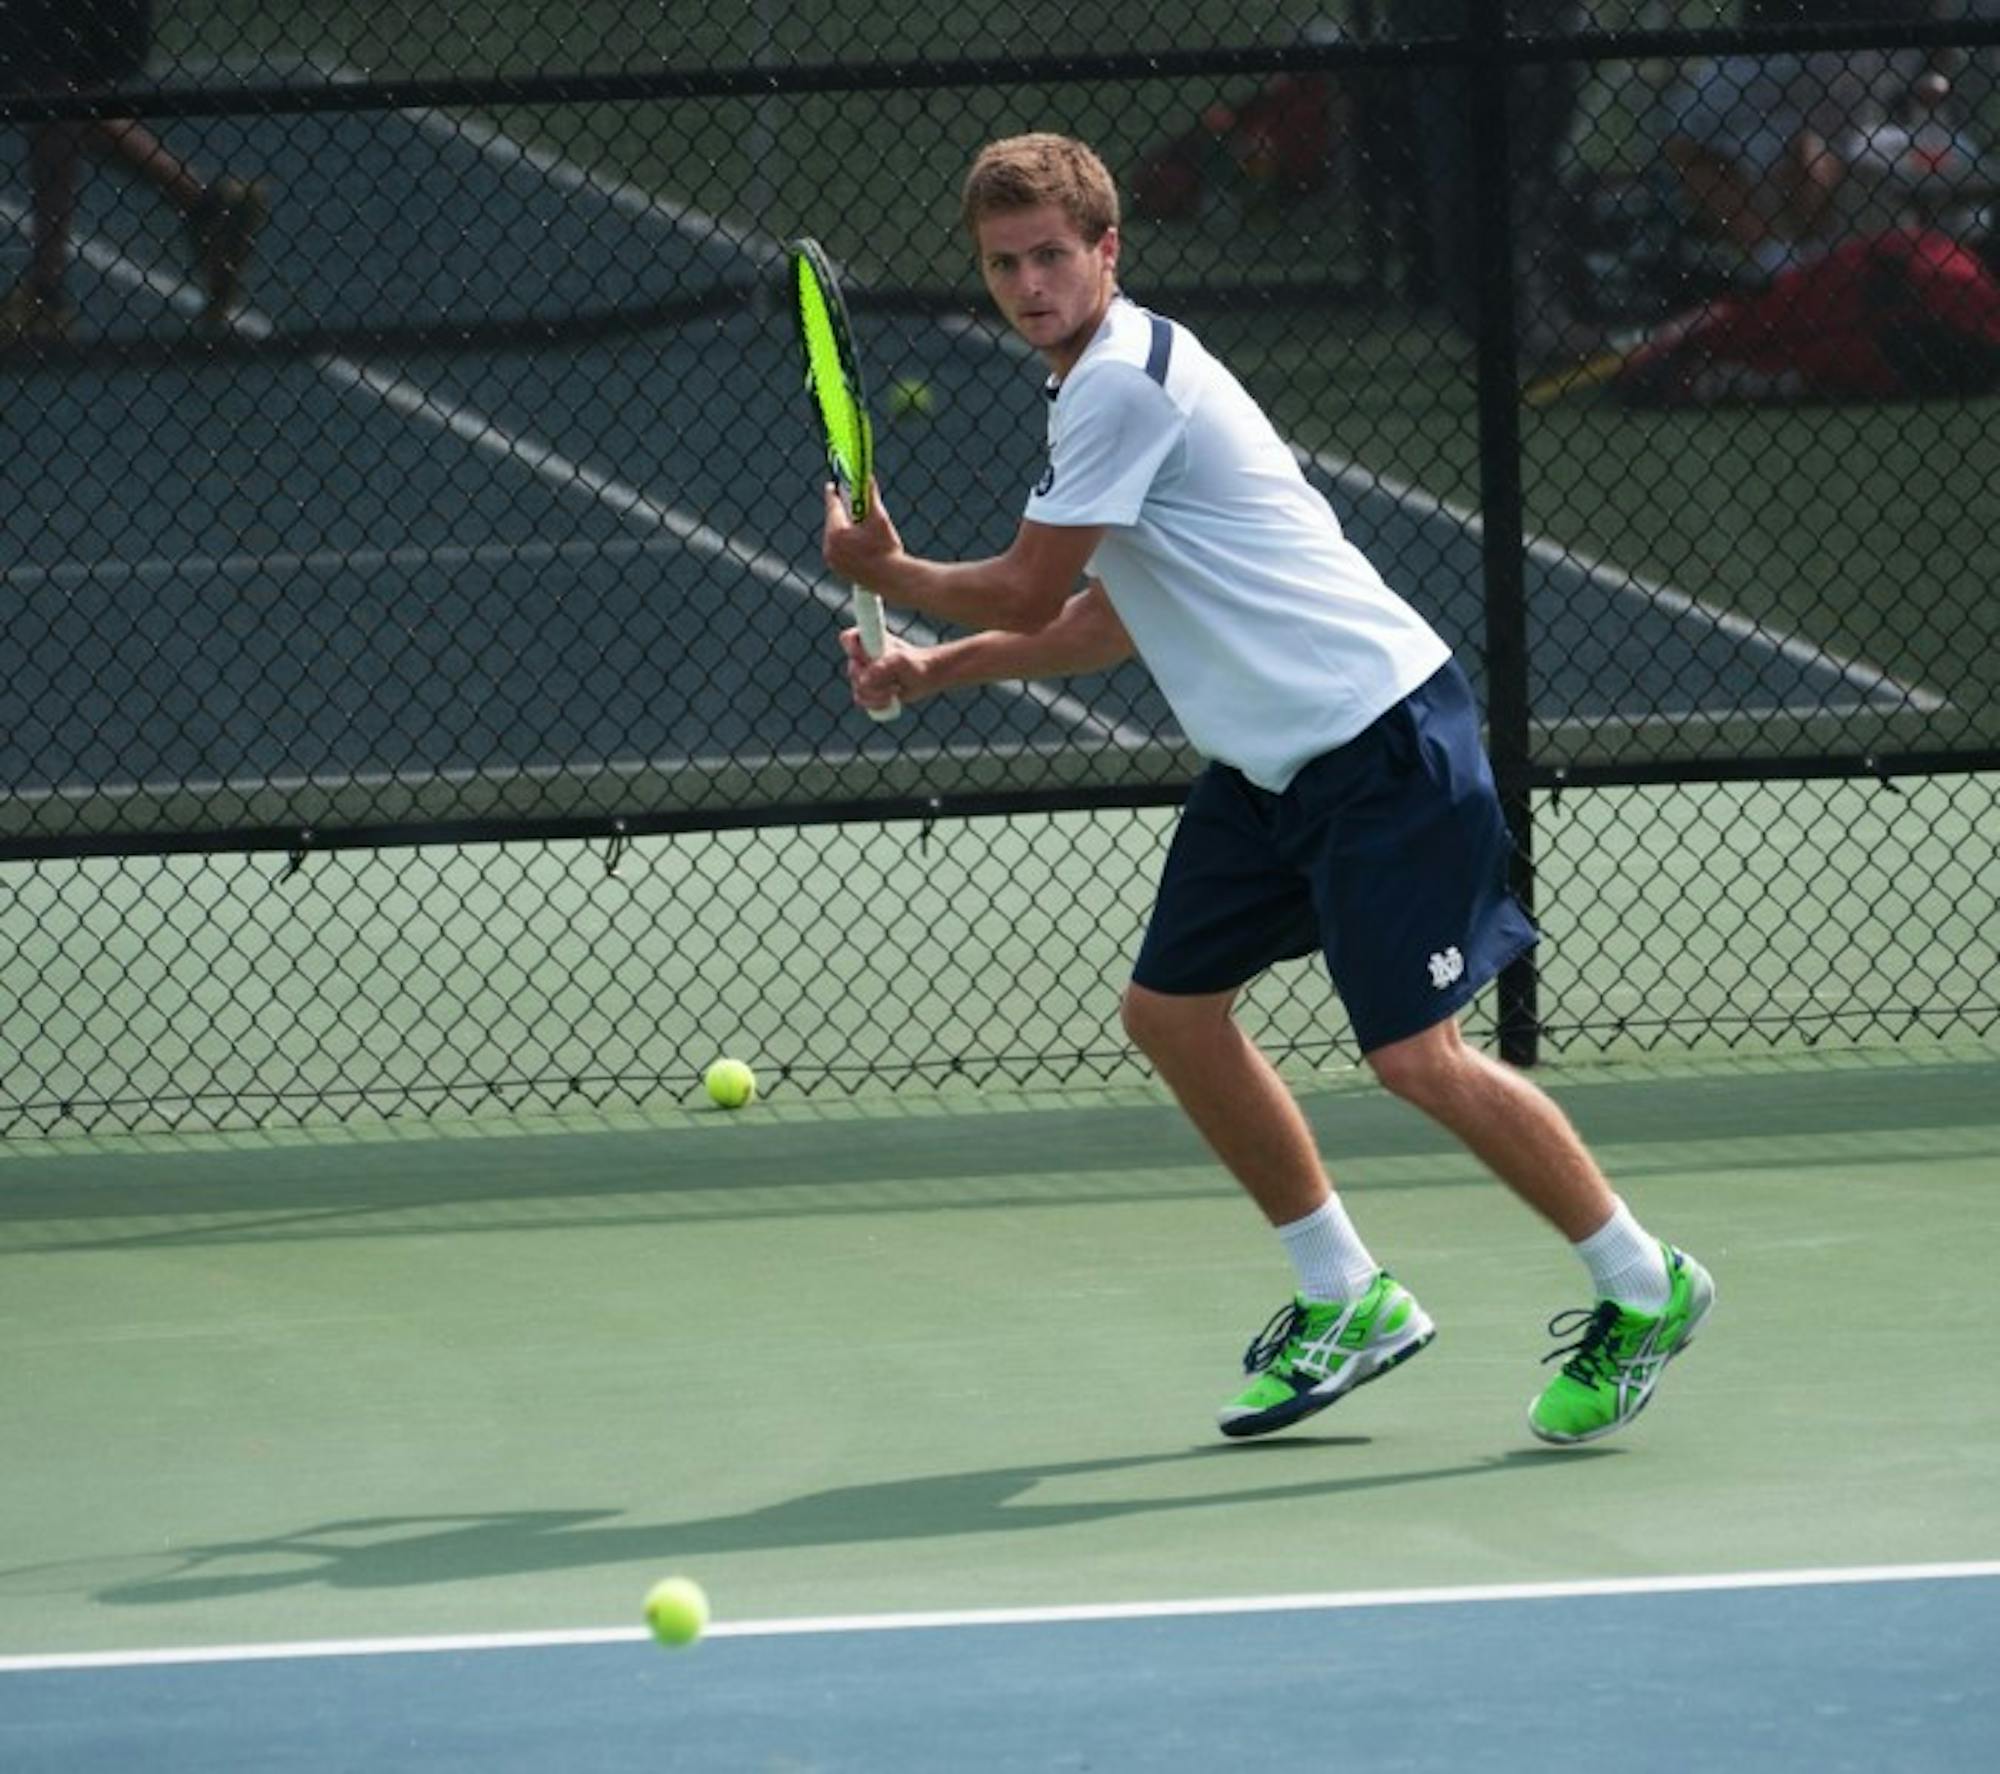 Irish senior Quentin Monaghan prepares to return the ball during Notre Dame’s 4-3 win over North Carolina State on April 18 at Eck Tennis Center.